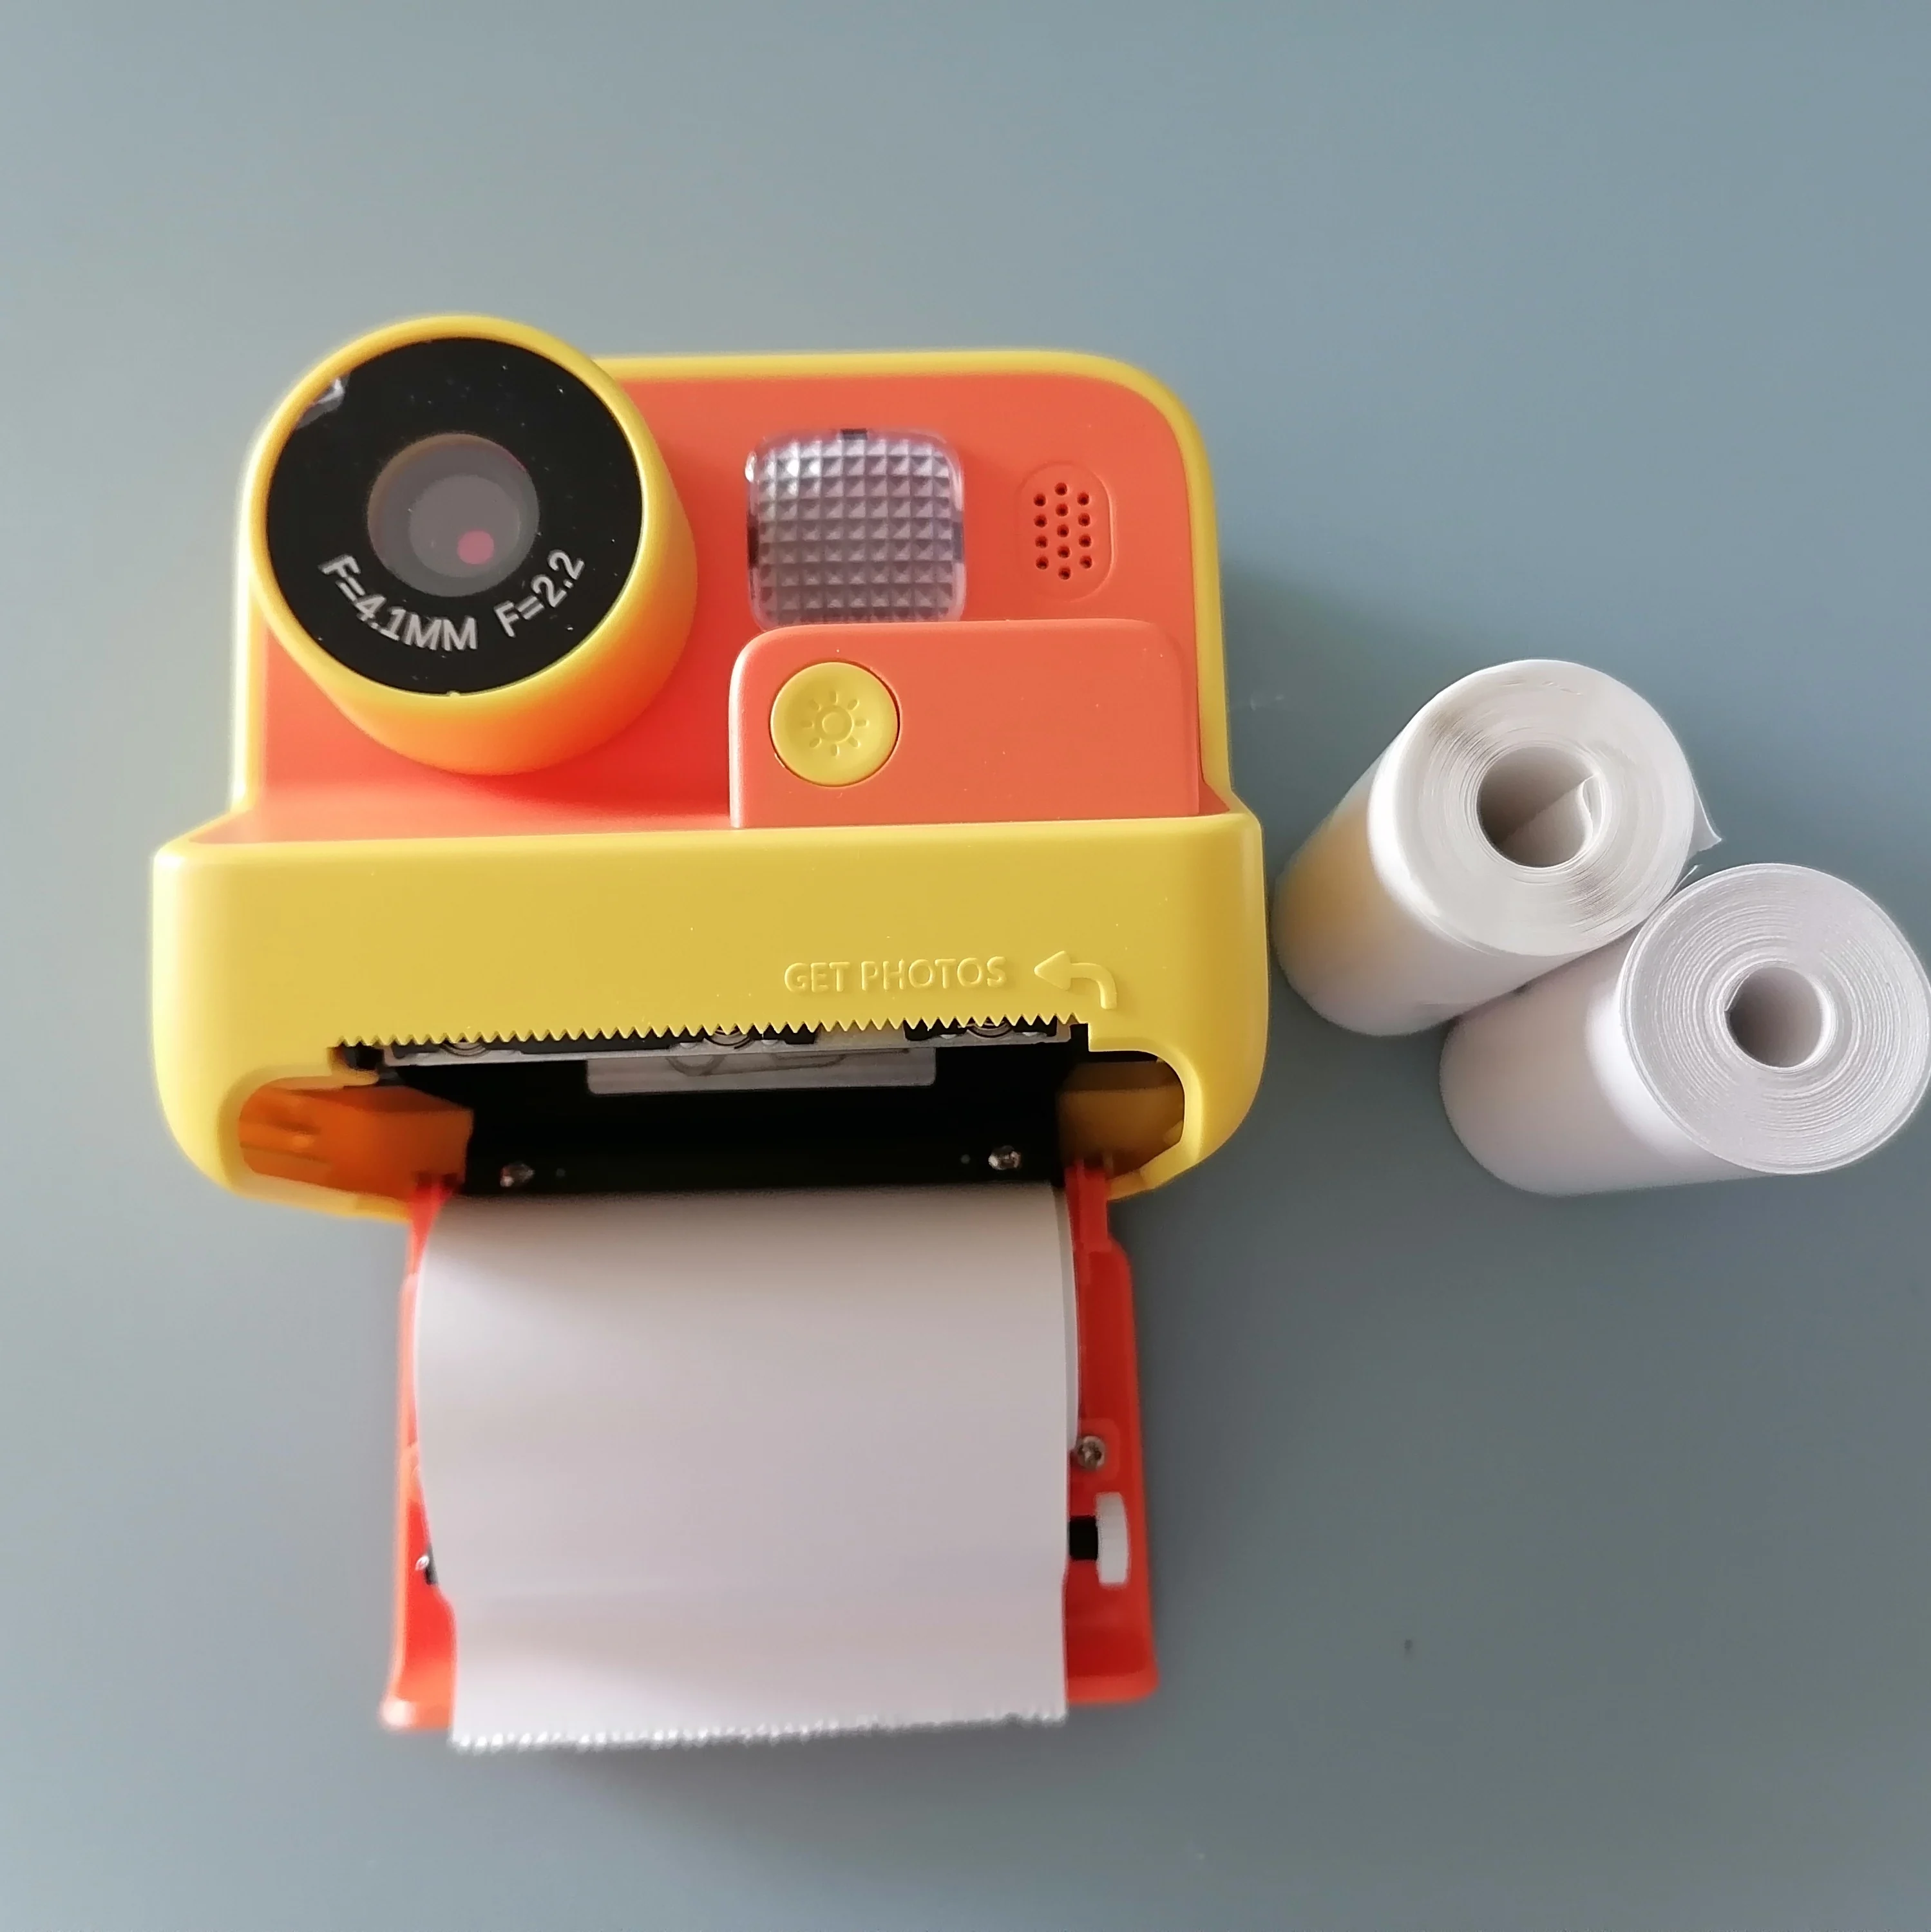 Scb6015a92e624916926331f49764d6542 Instant Print Kids Camera 2.0" 1080P Video Photo with Thermal Print Paper